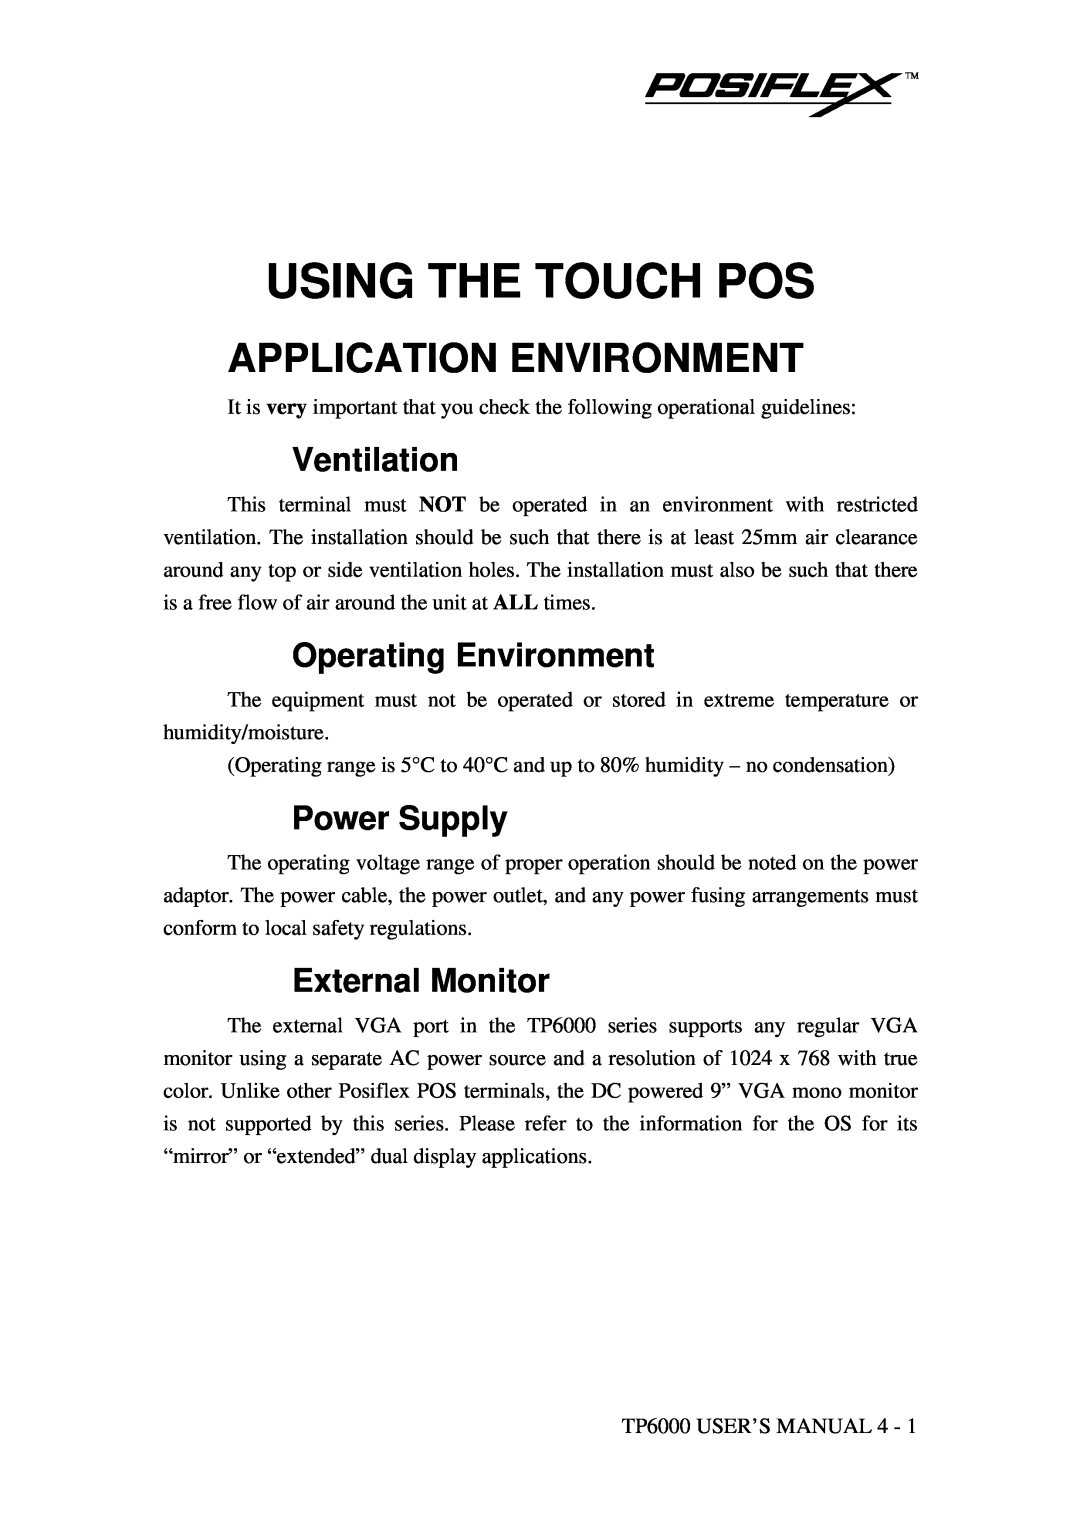 Mustek TP-6000 user manual Using The Touch Pos, Application Environment, Ventilation, Operating Environment, Power Supply 